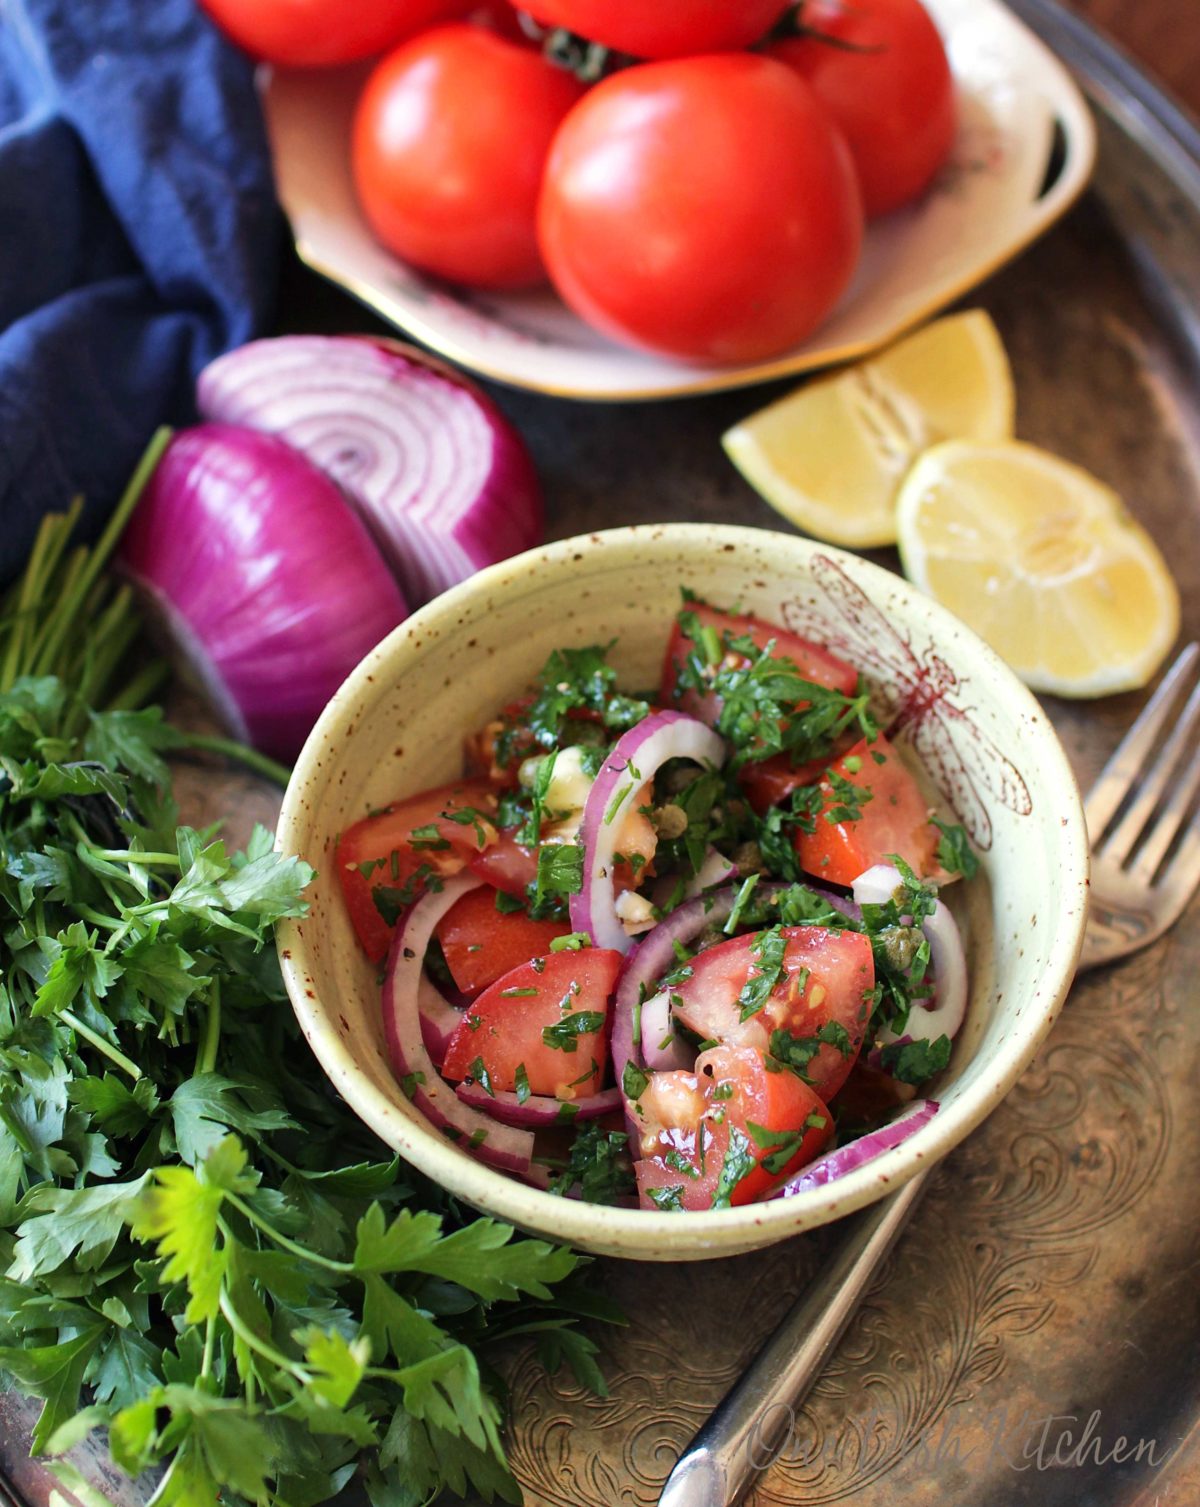 a tomato salad in a yellow bowl on a silver tray surrounded by a red onion sliced in half, a bowl of fresh tomatoes, lemon slices, and parsley.